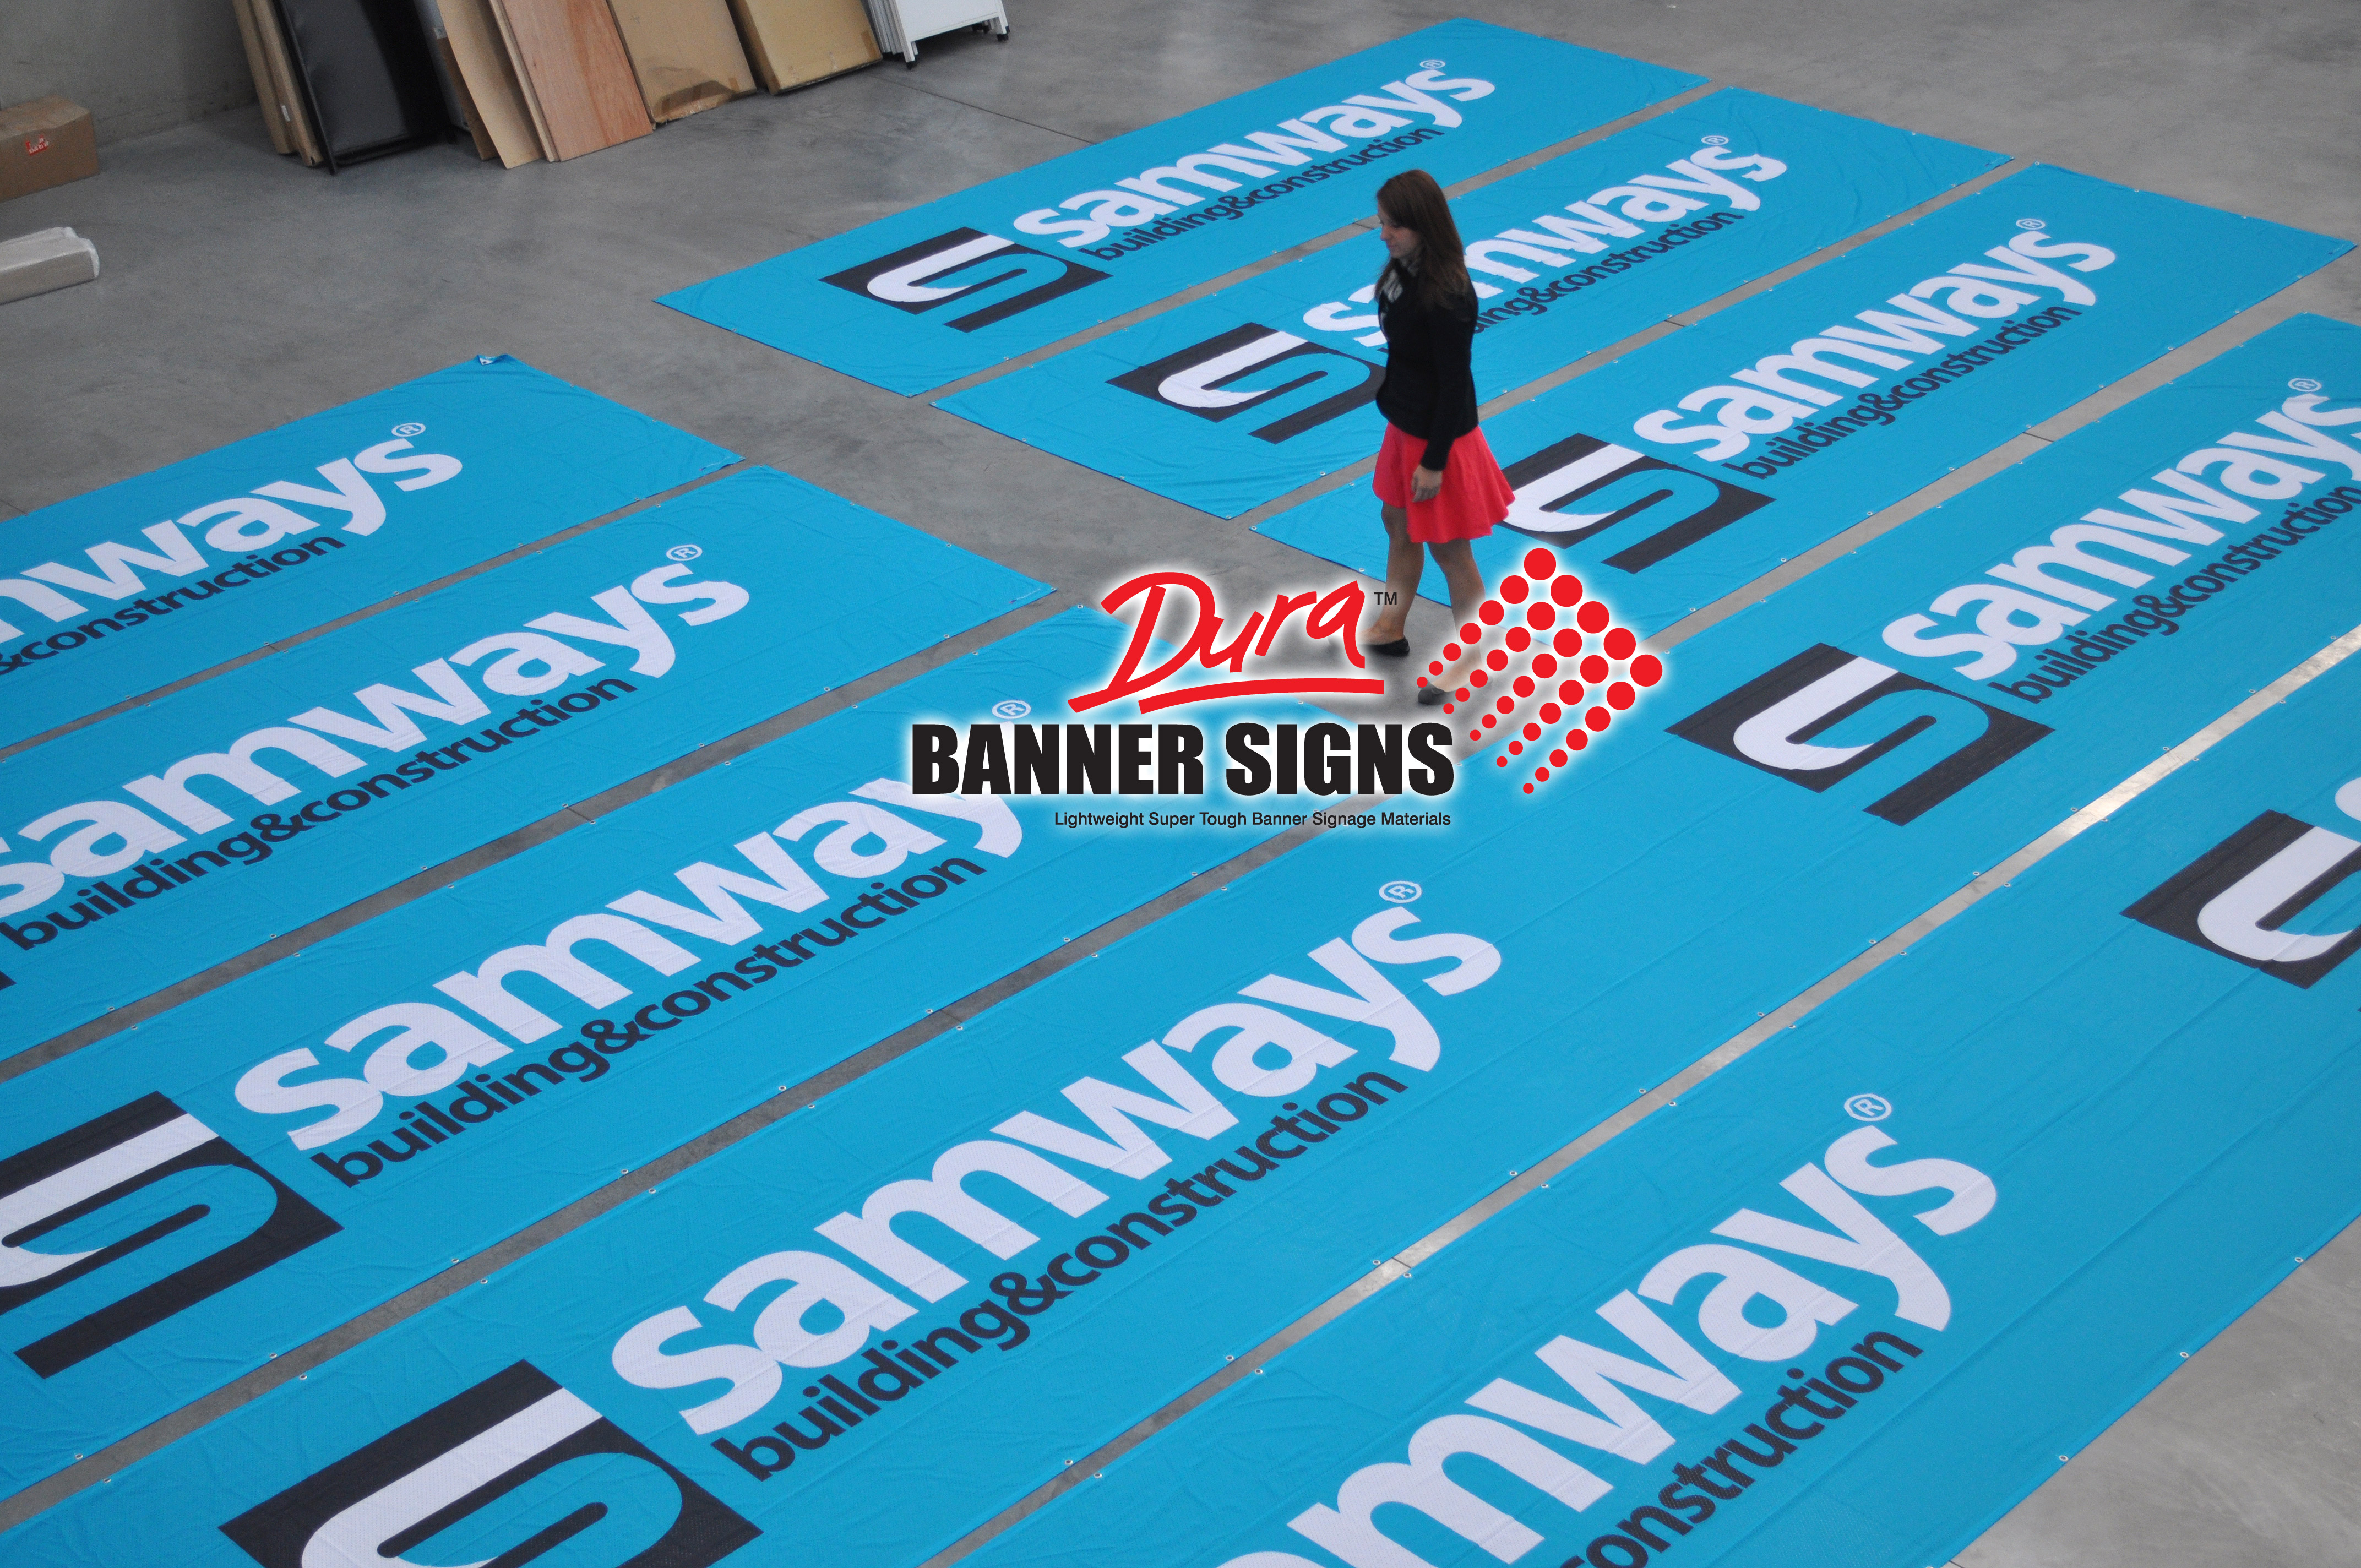 From this photo you can gain an idea of the skills and experience we offer our trade and advertising agency, sport management and building companies whom need signage that works.